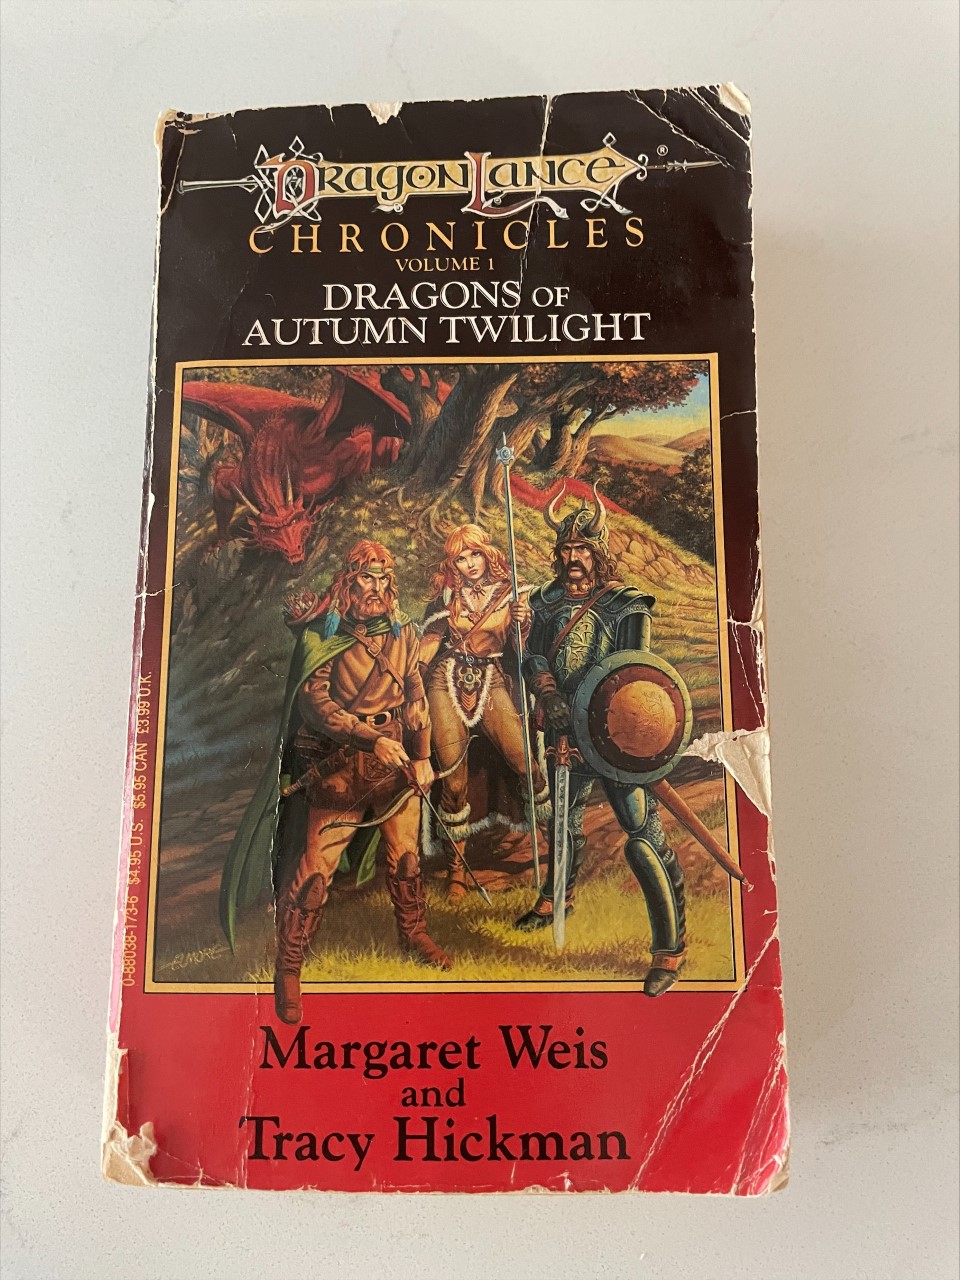 DragonLance Chronicles 1: Dragons of Autumn Twilight Really Delivers